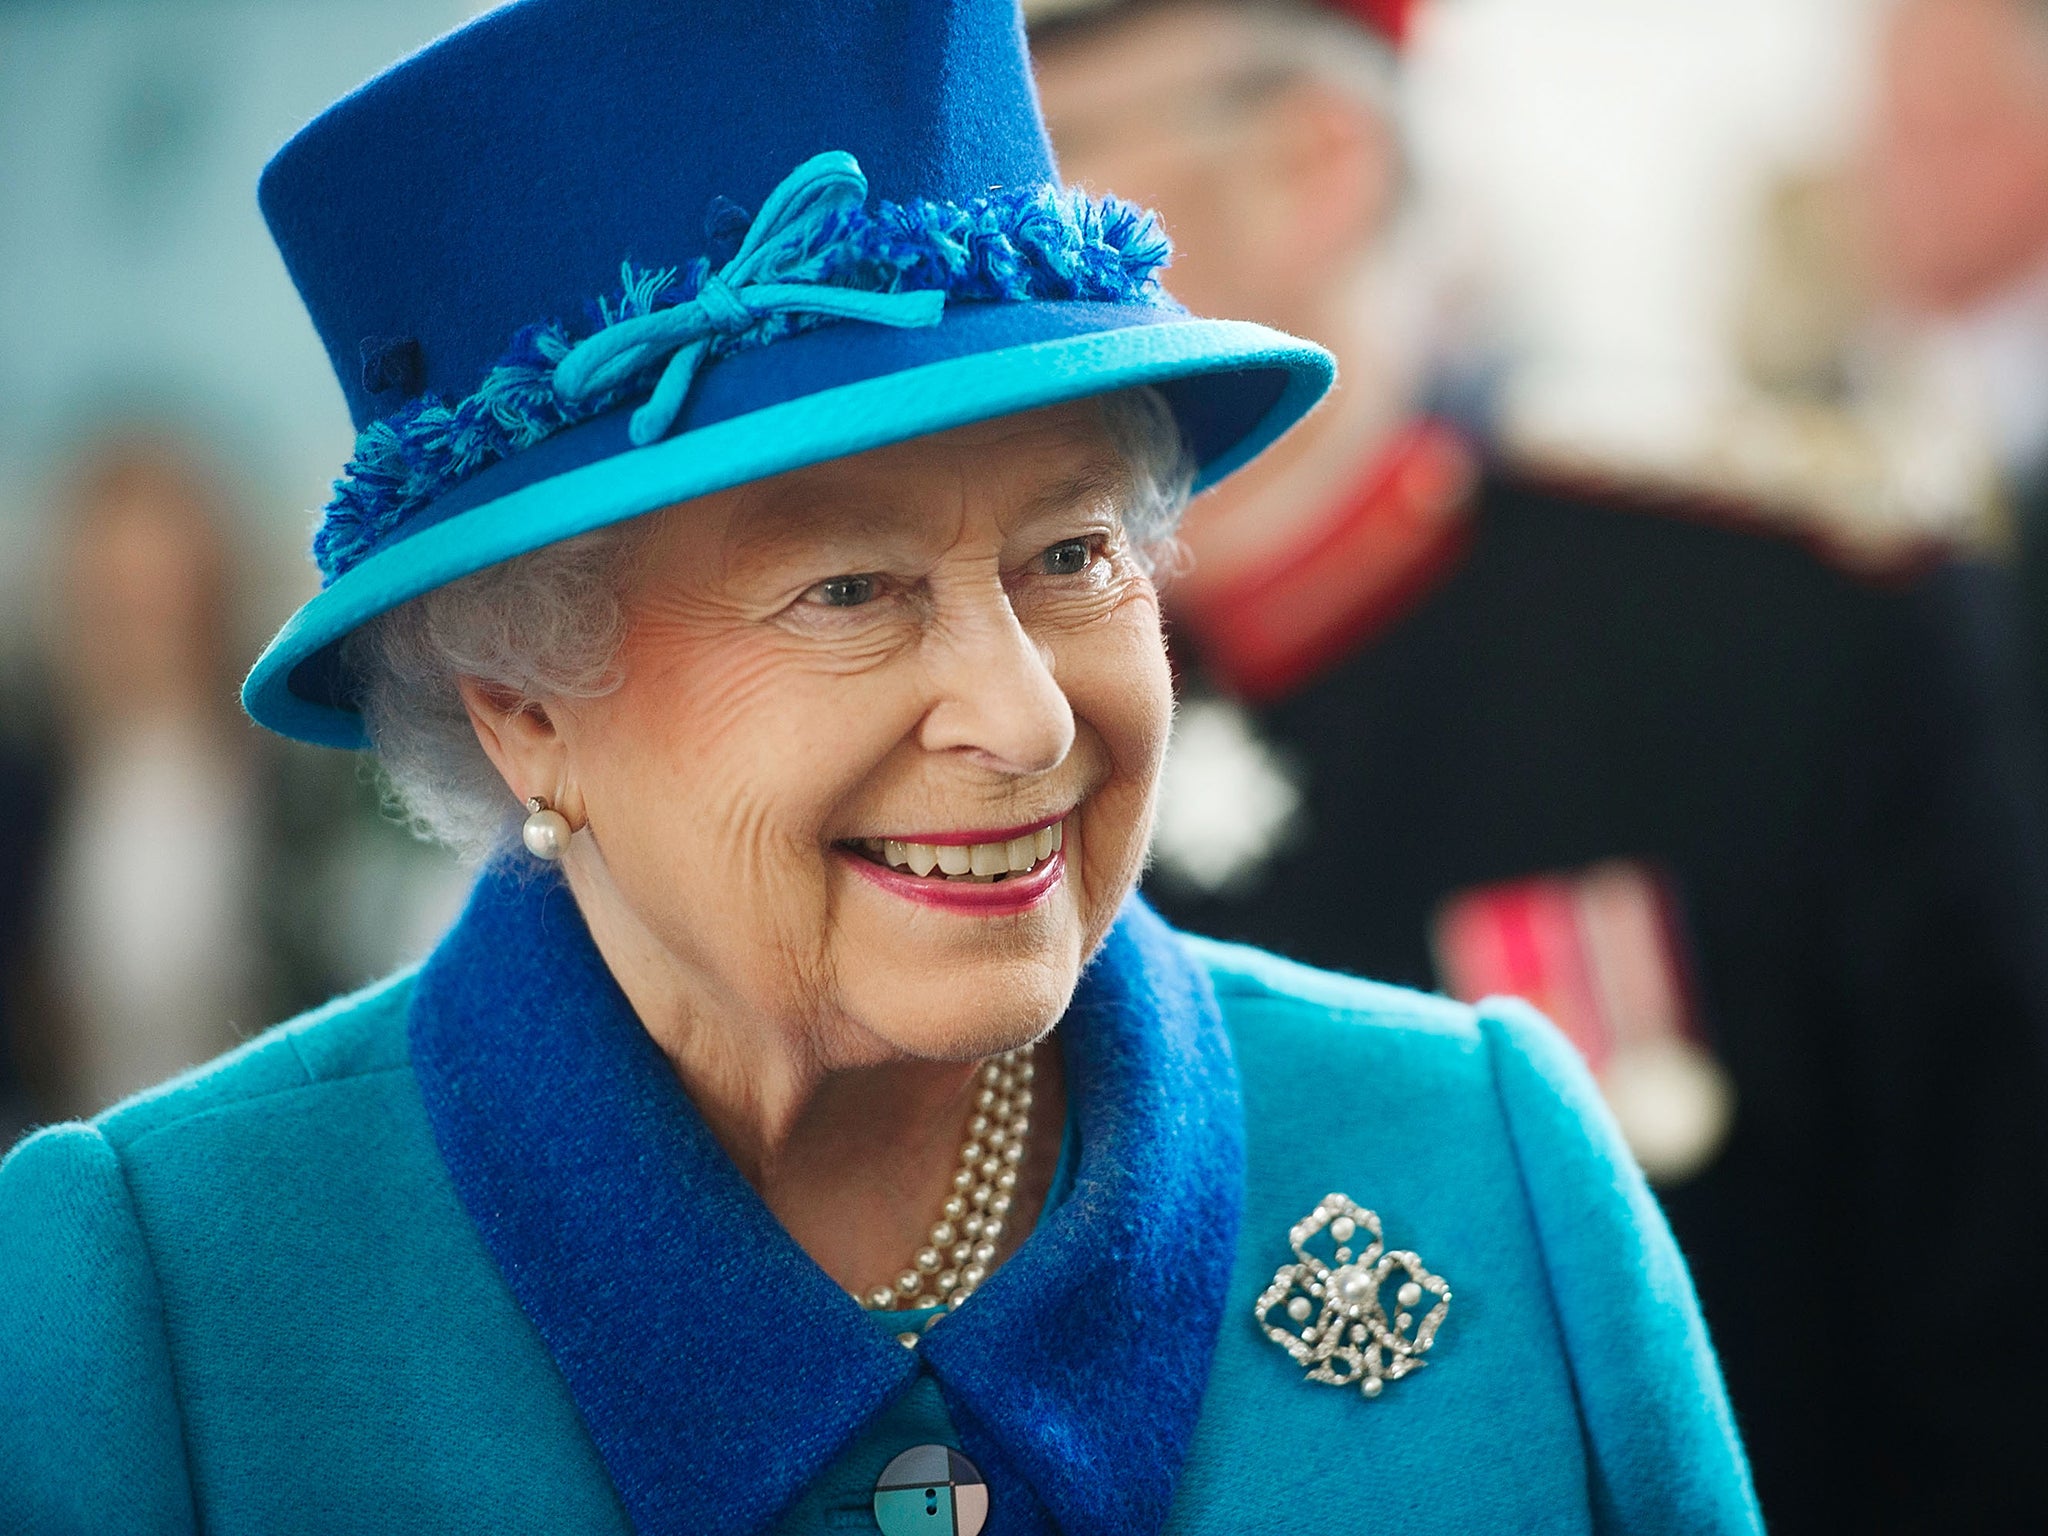 The Queen turned 90 this week